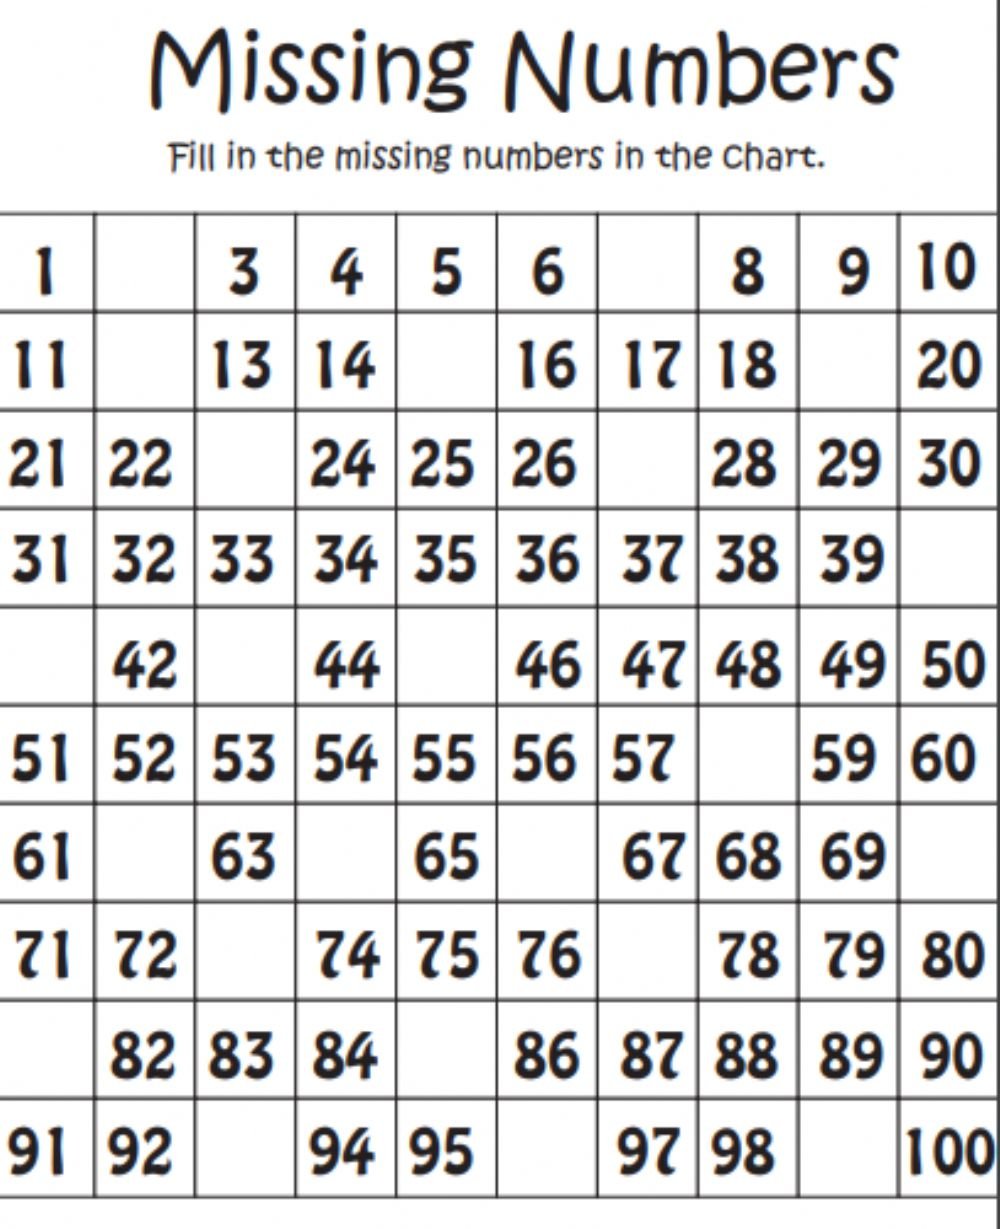 Fill In The Missing Numbers 1-100 Worksheet